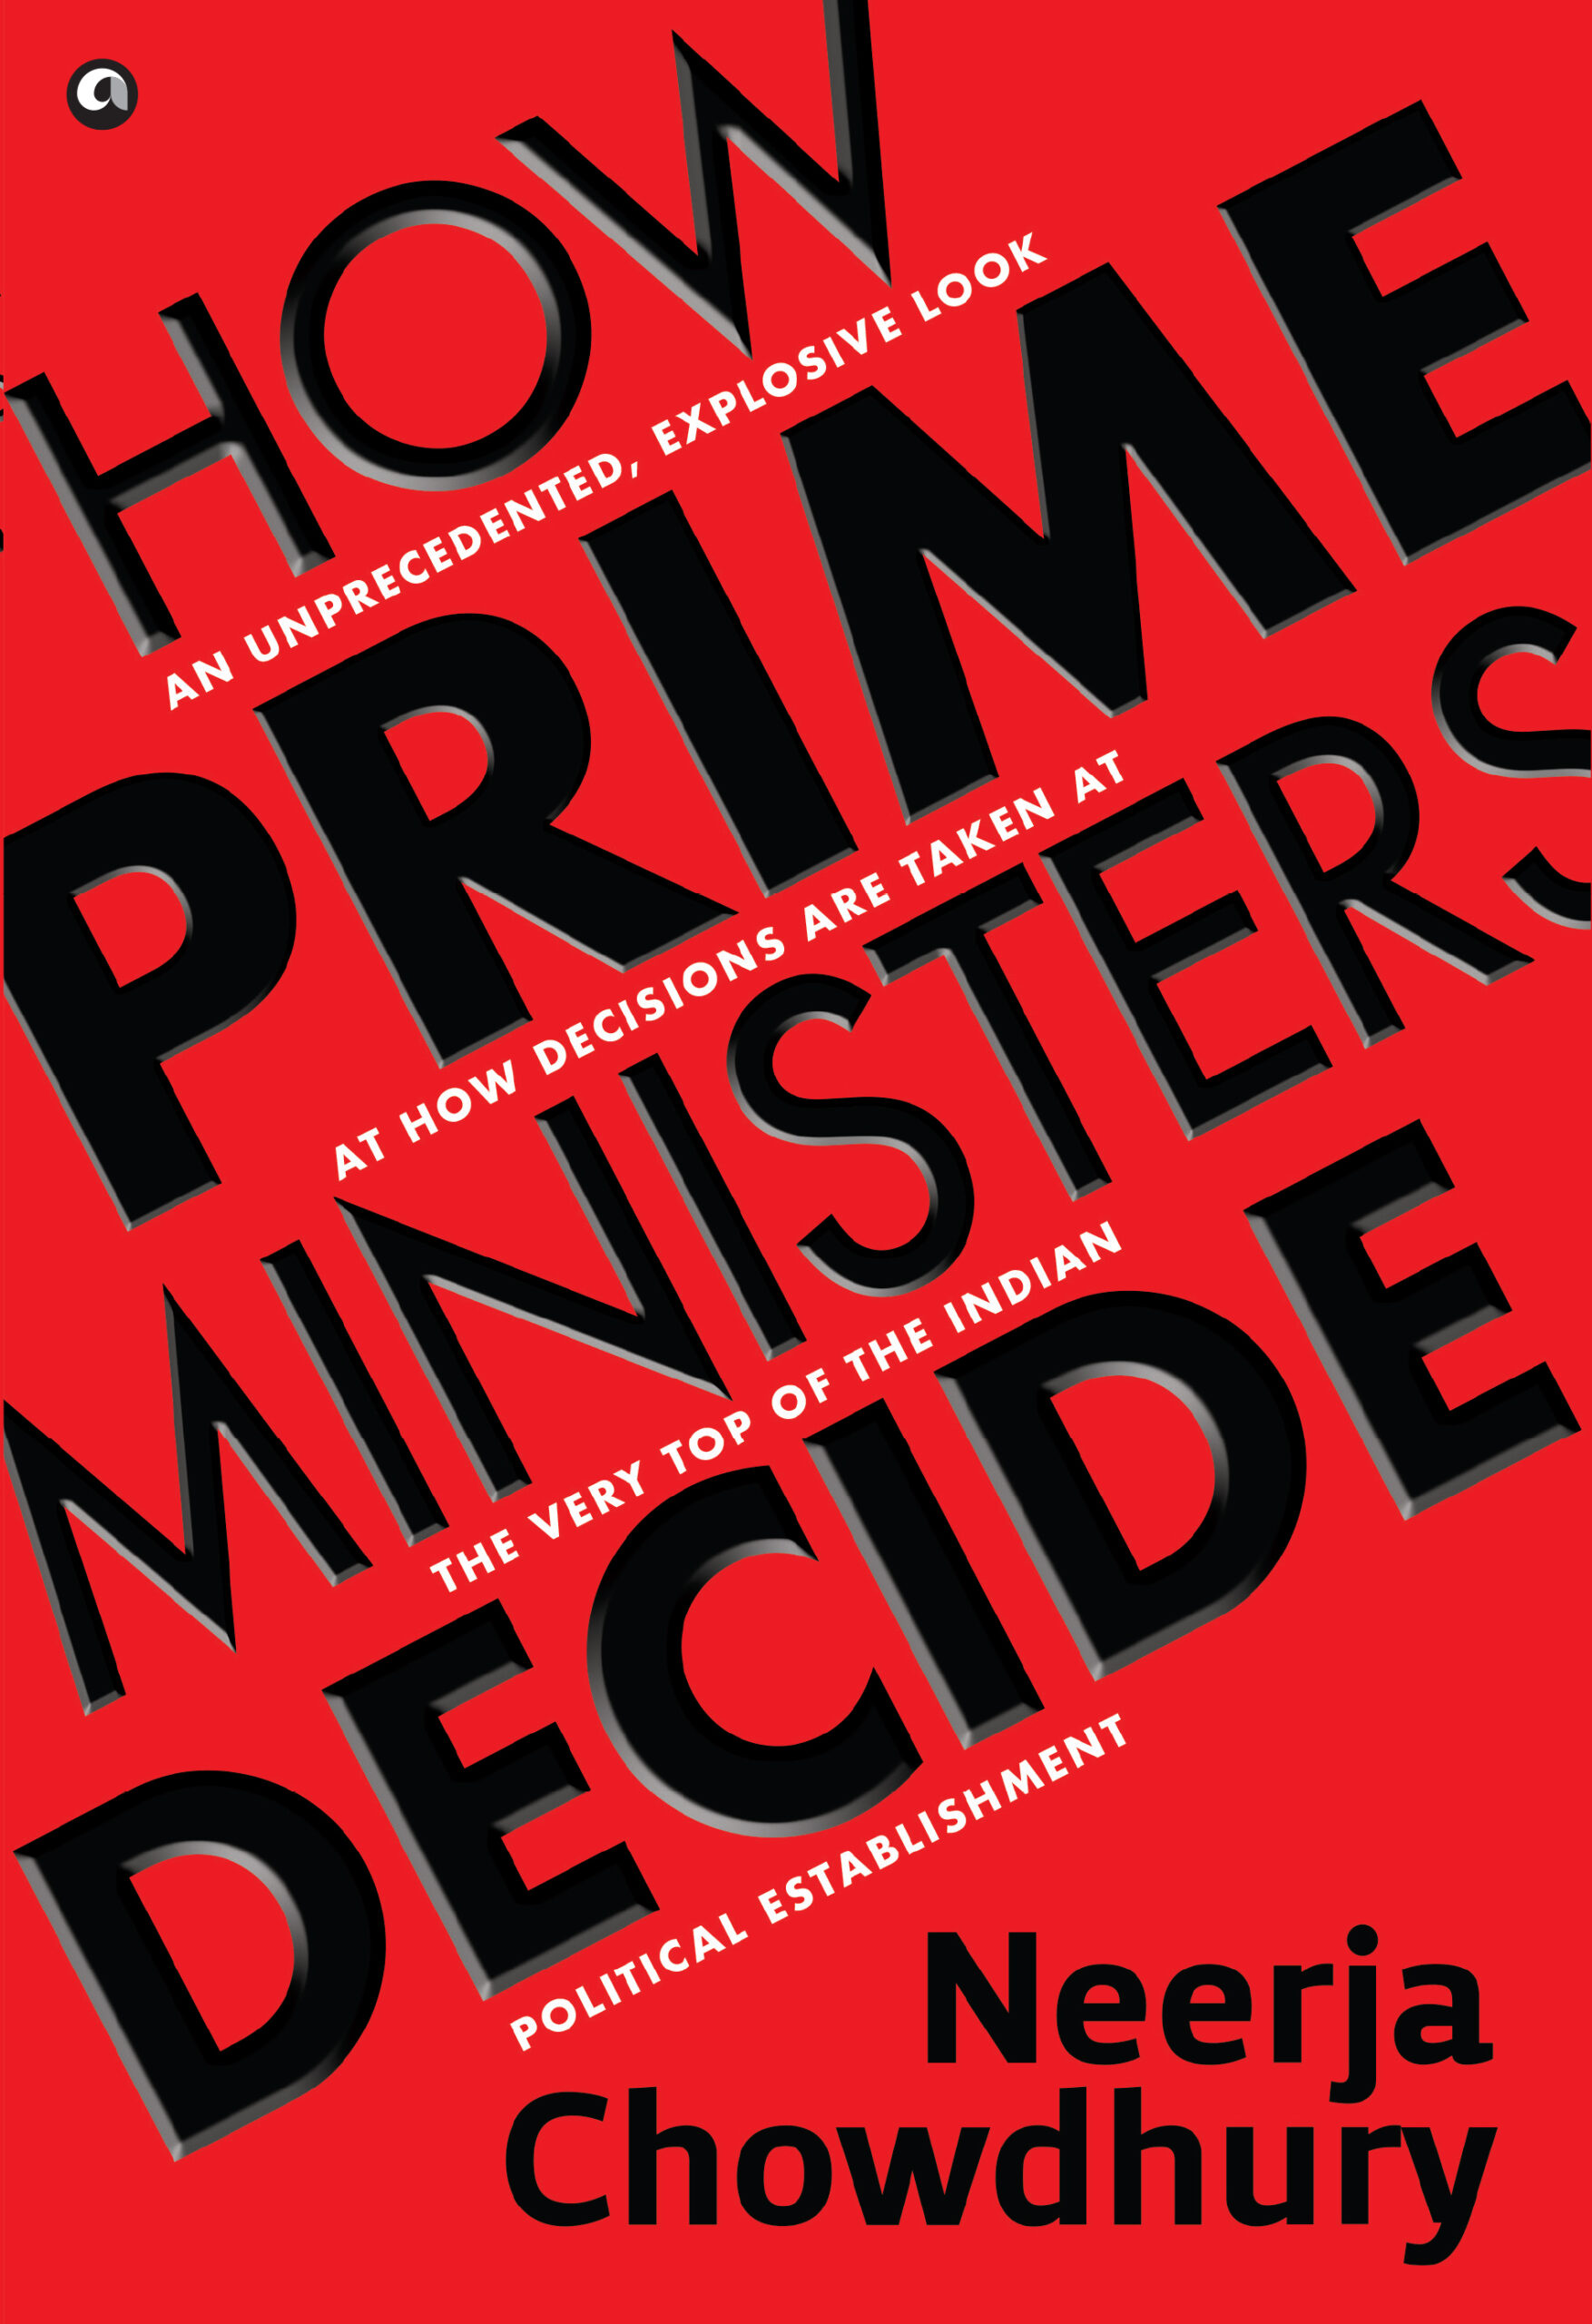 How Prime Ministers Decide